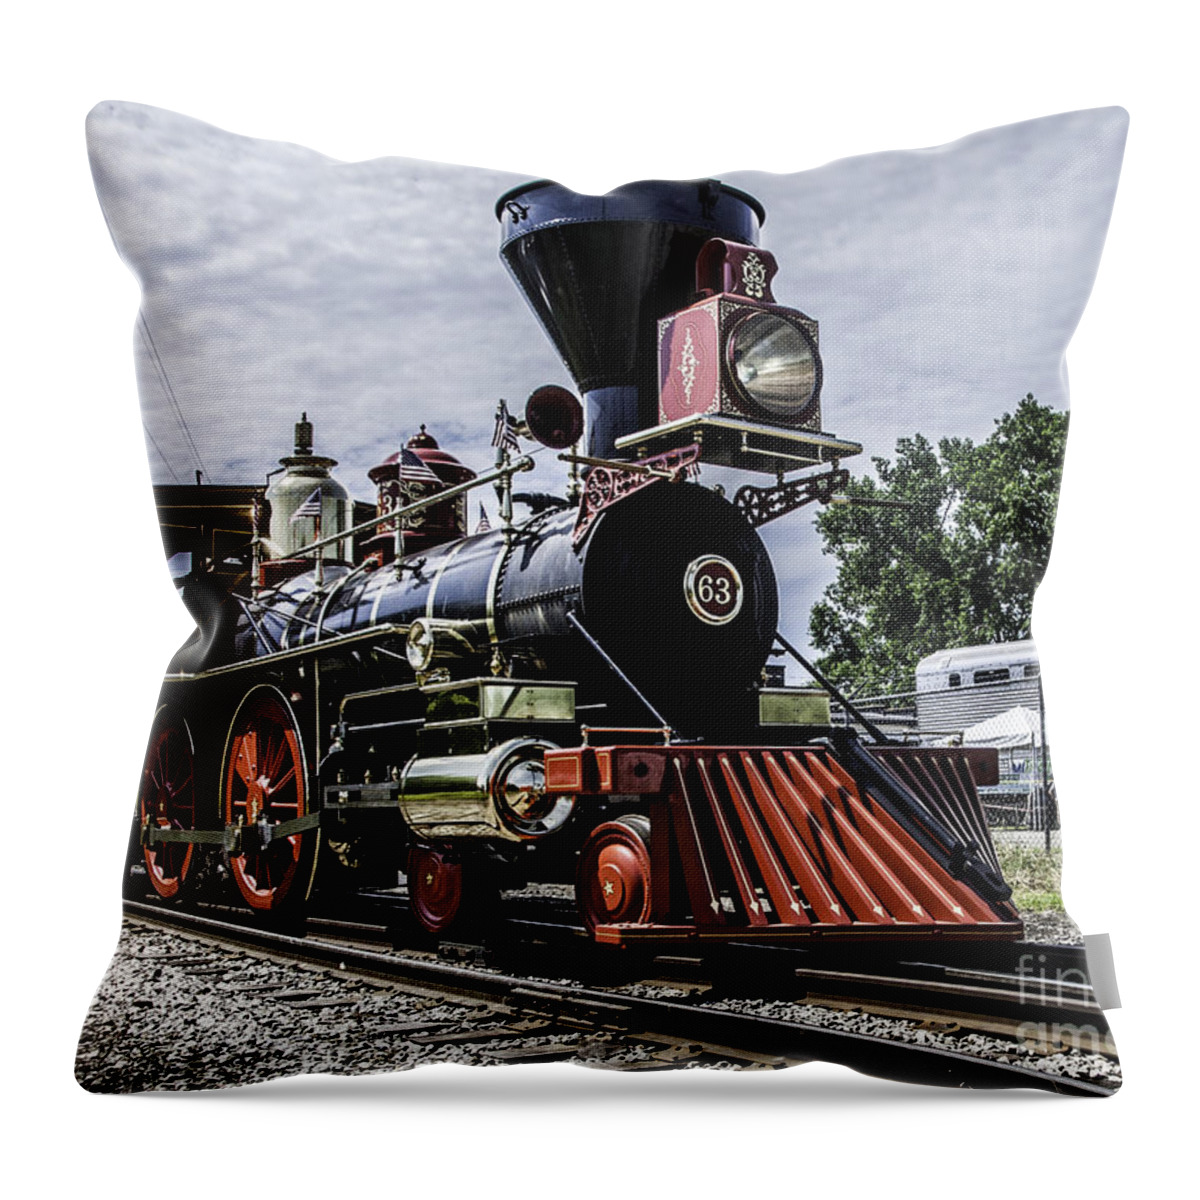 63 Throw Pillow featuring the photograph 63 by Ronald Grogan